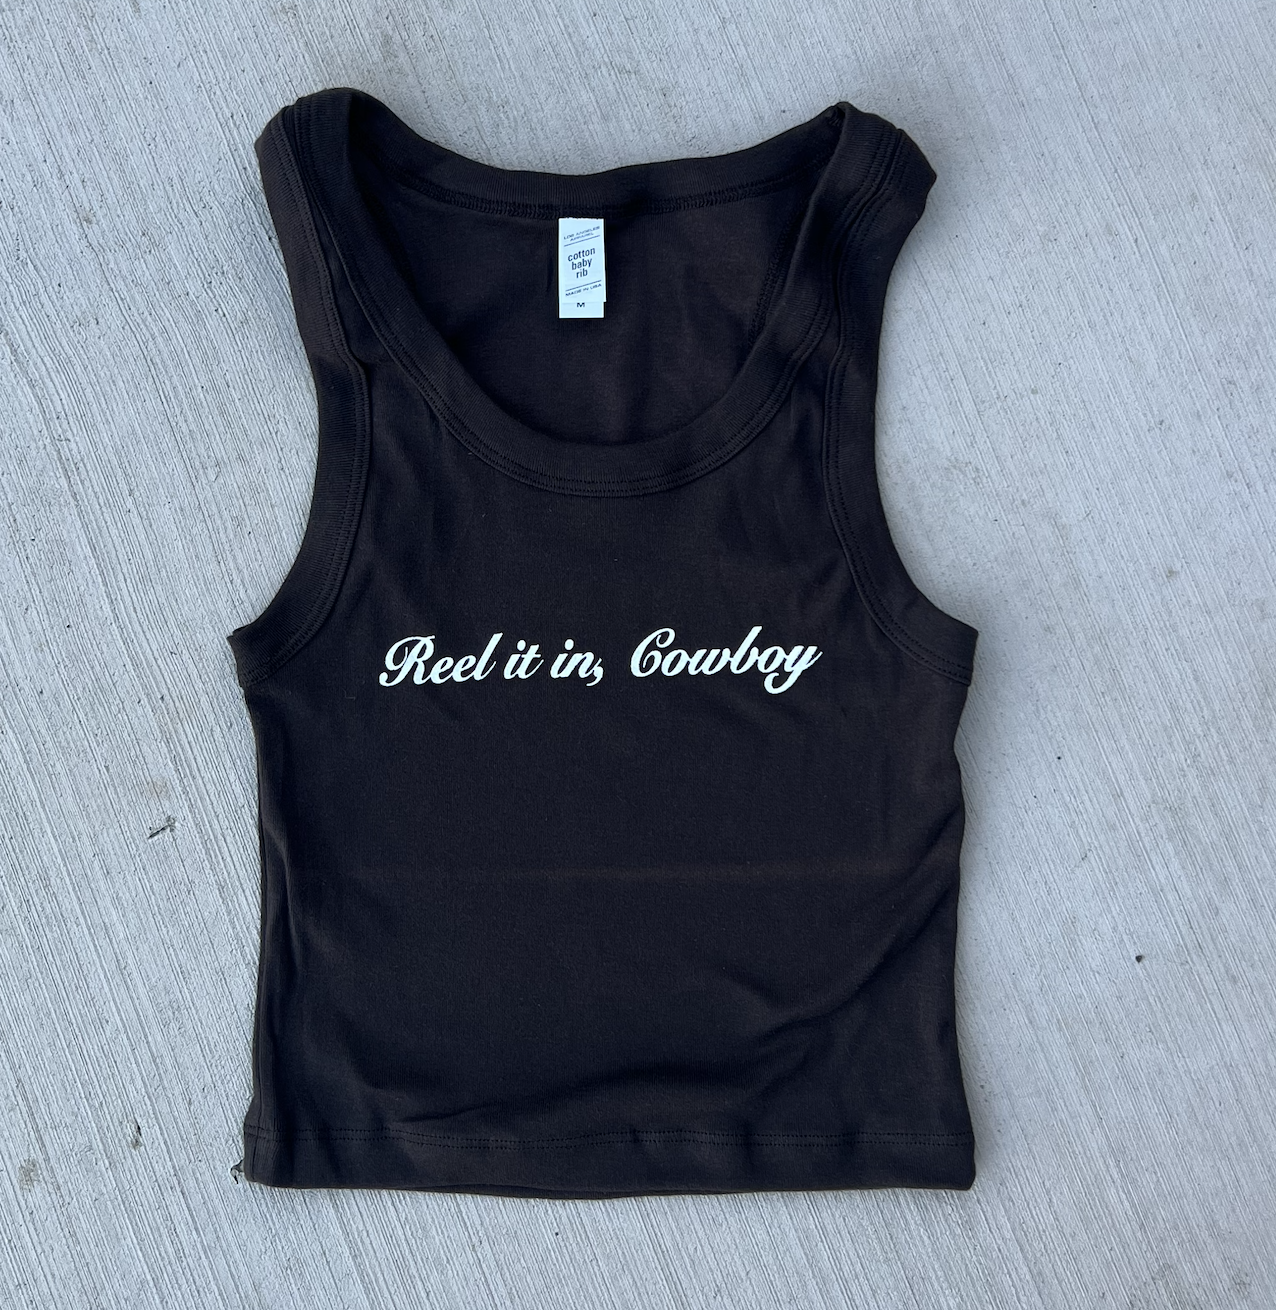 LIMITED EDITION "Reel it in, Cowboy" Cropped Tank Top